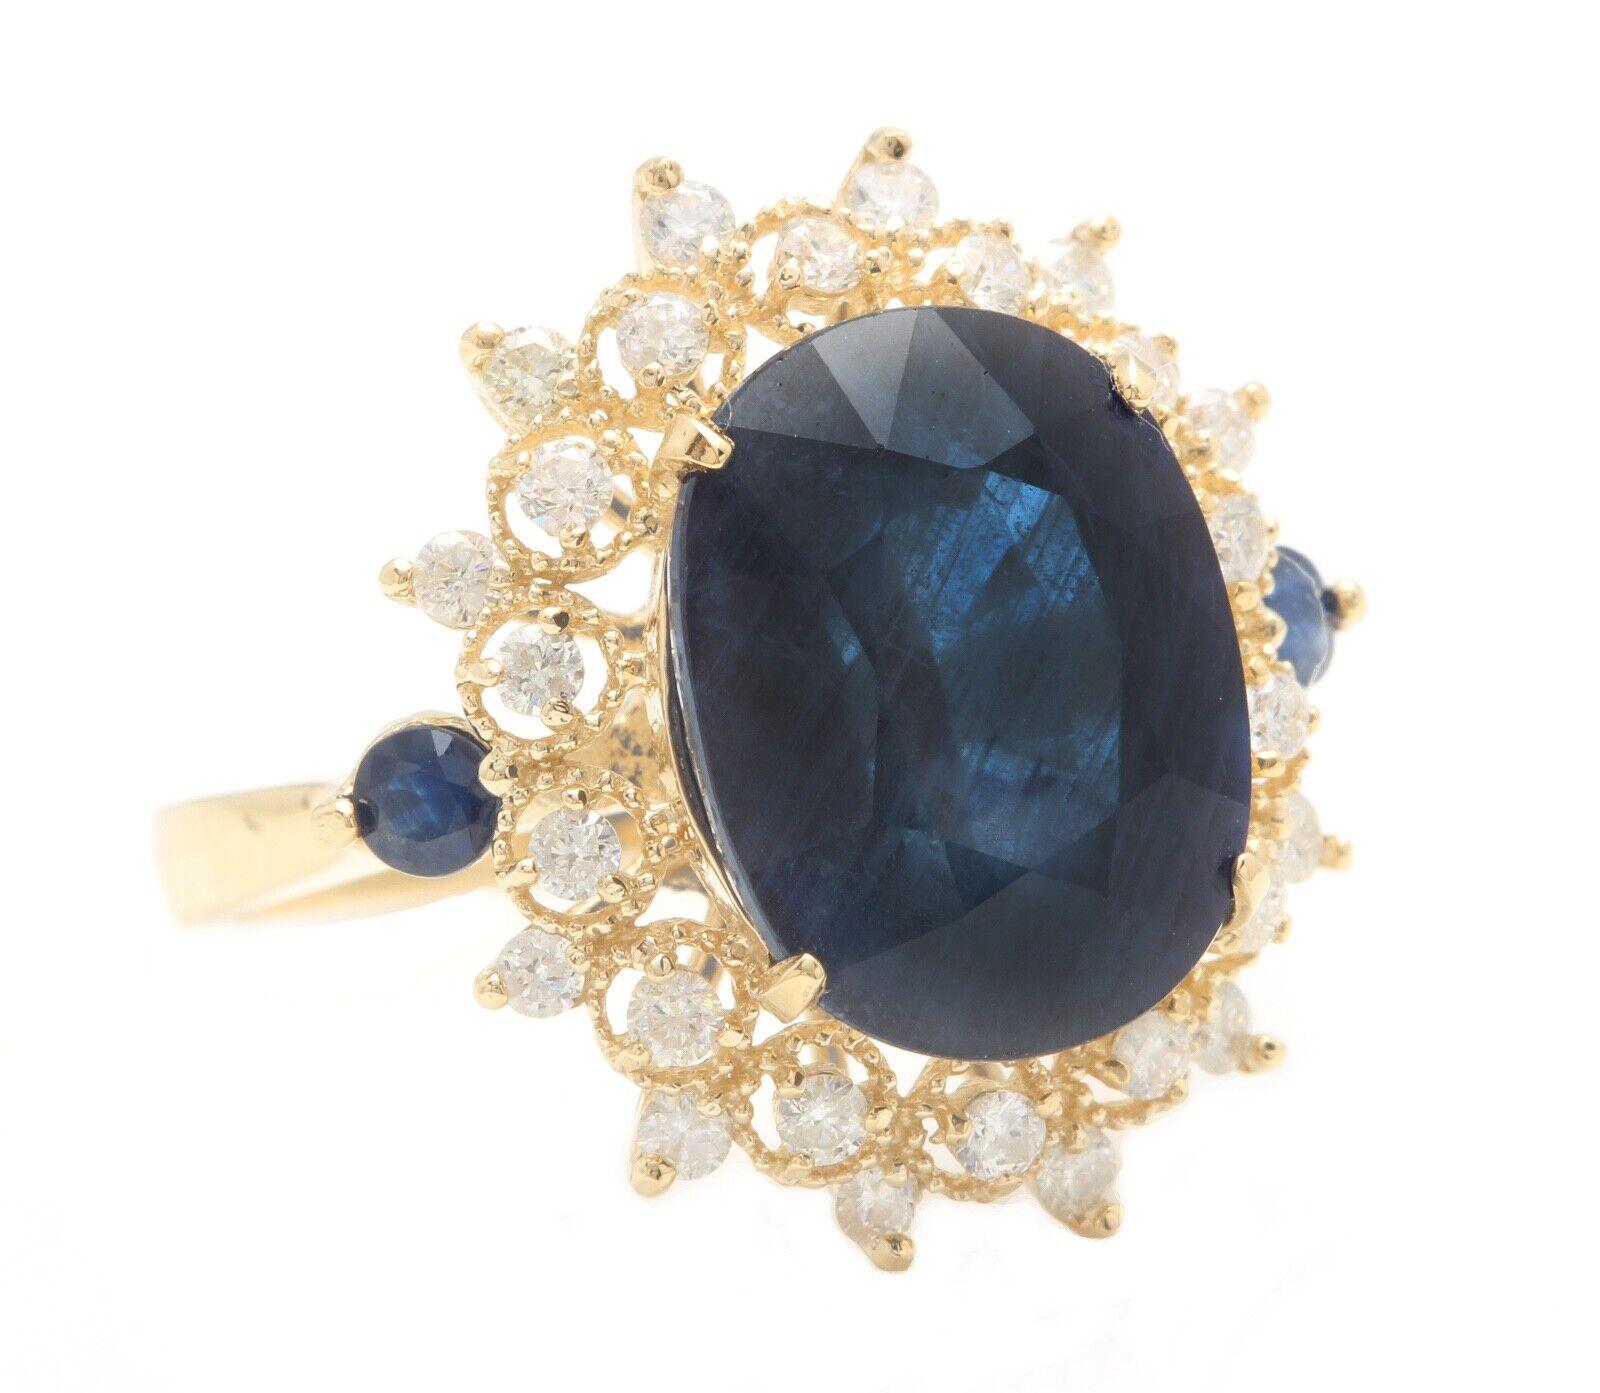 8.55 Carats Exquisite Natural Blue Sapphire and Diamond 14K Solid Yellow Gold Ring

Suggested Replacement Value Approx. $6,000.00

Total Blue Sapphire Weight is: Approx. 8.00 Carats 

Sapphire Measures: Approx. 13.85 x 10.70mm

Sapphire Treatment: